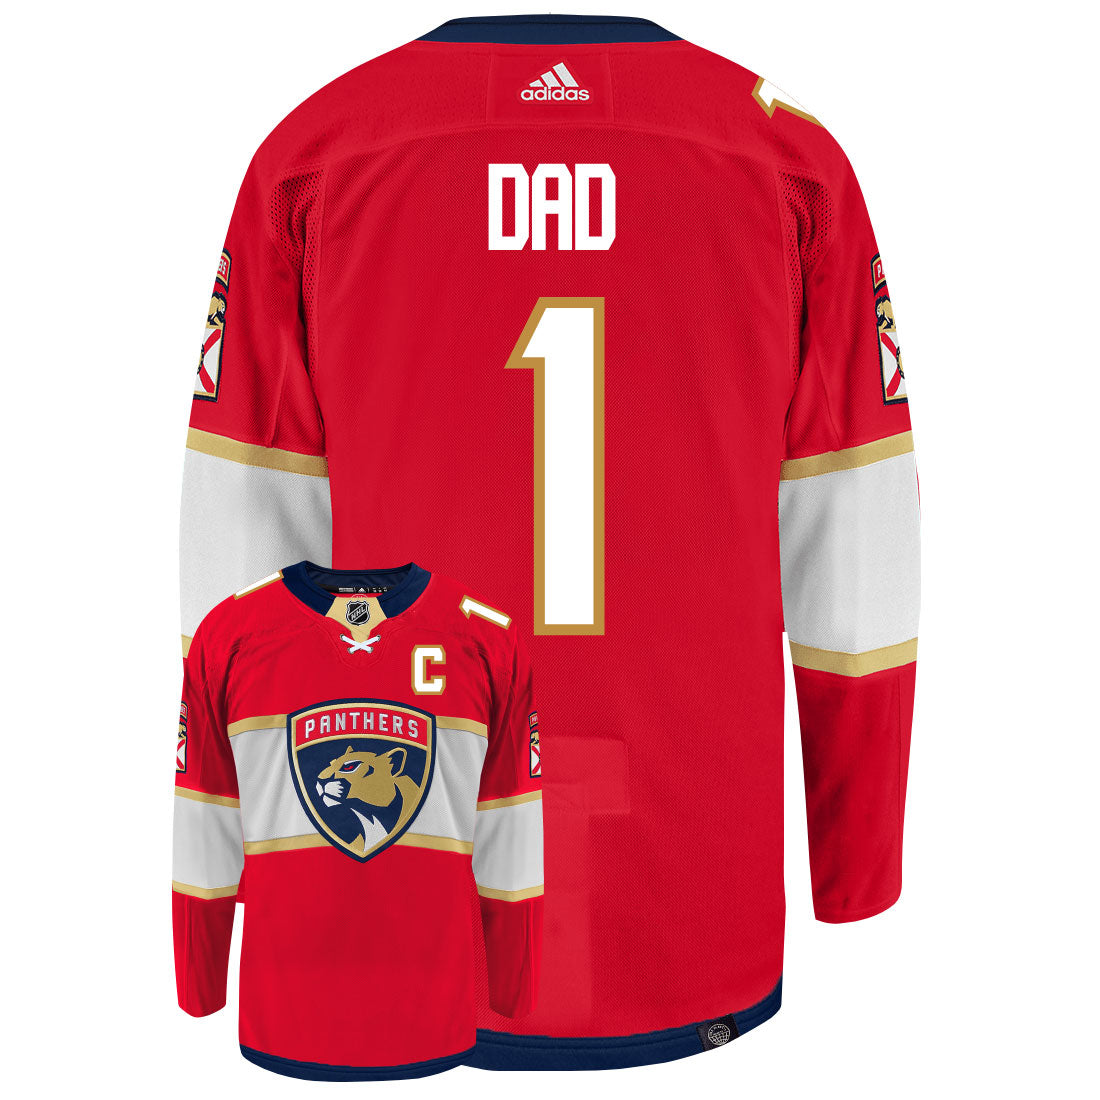 Florida Panthers Dad Number One Adidas Primegreen Authentic NHL Hockey Jersey